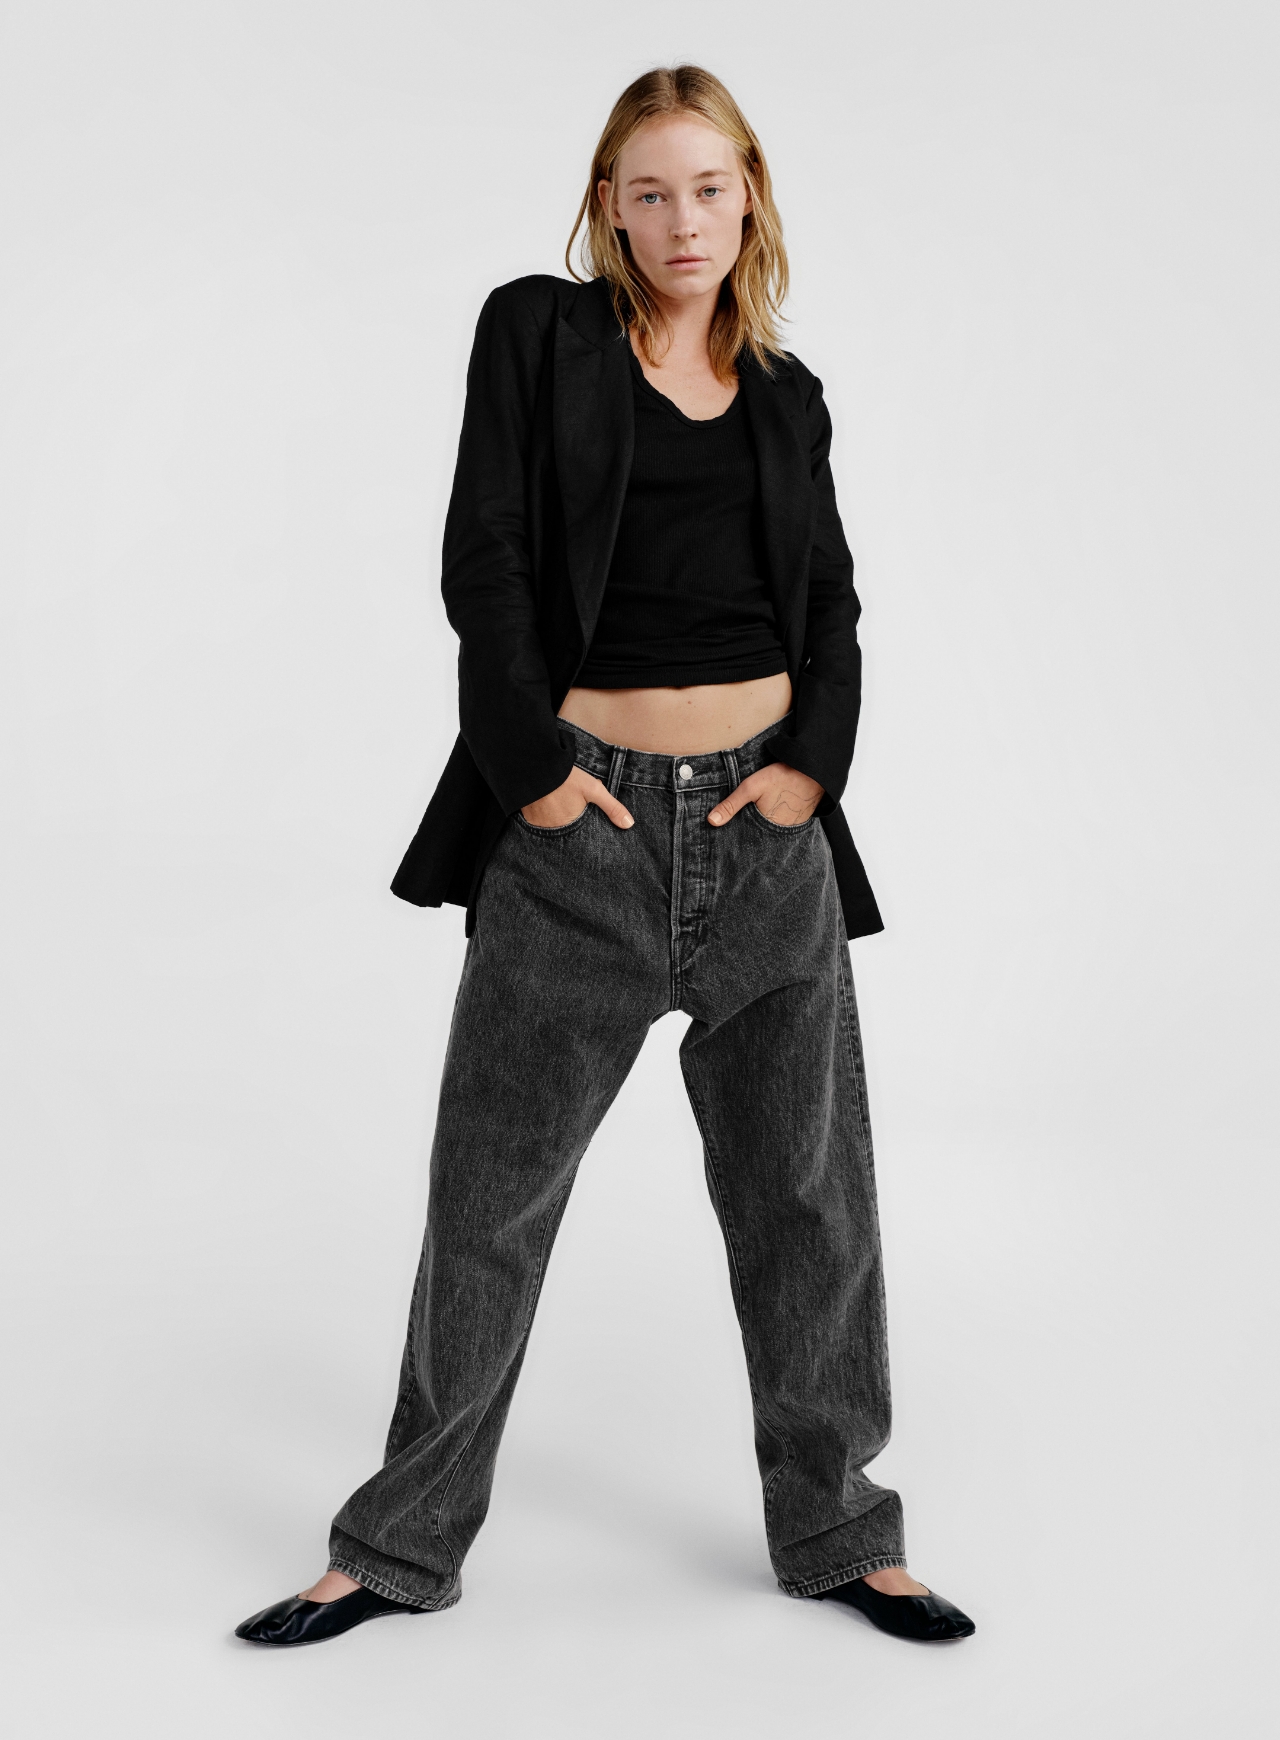 Women´s Grey Trousers, Explore our New Arrivals